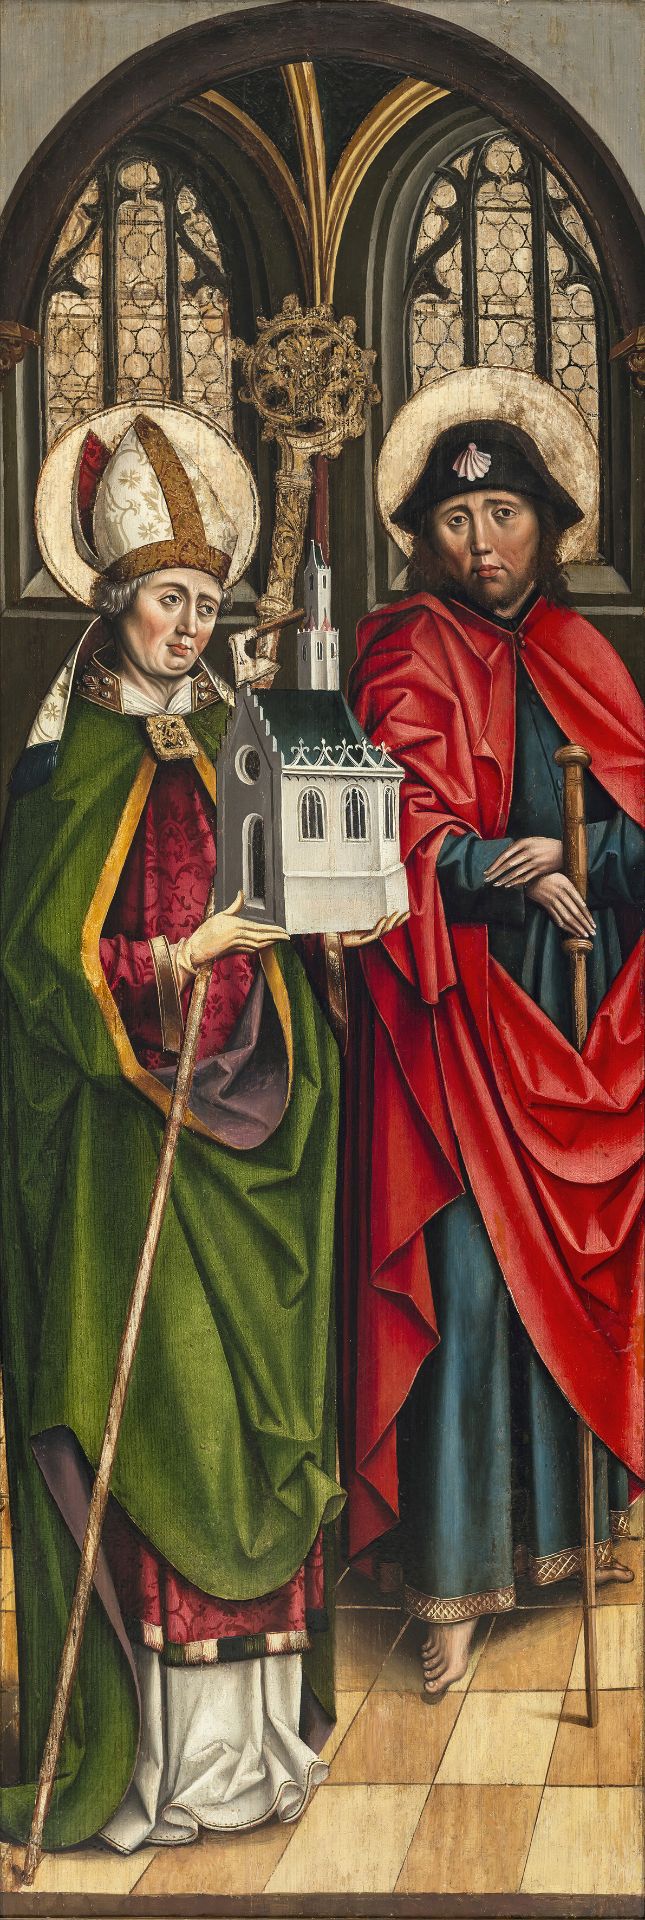 Oberrhein Anfang 16. Jh. Early 16th century - Saint Wolfgang and Saint James the Great